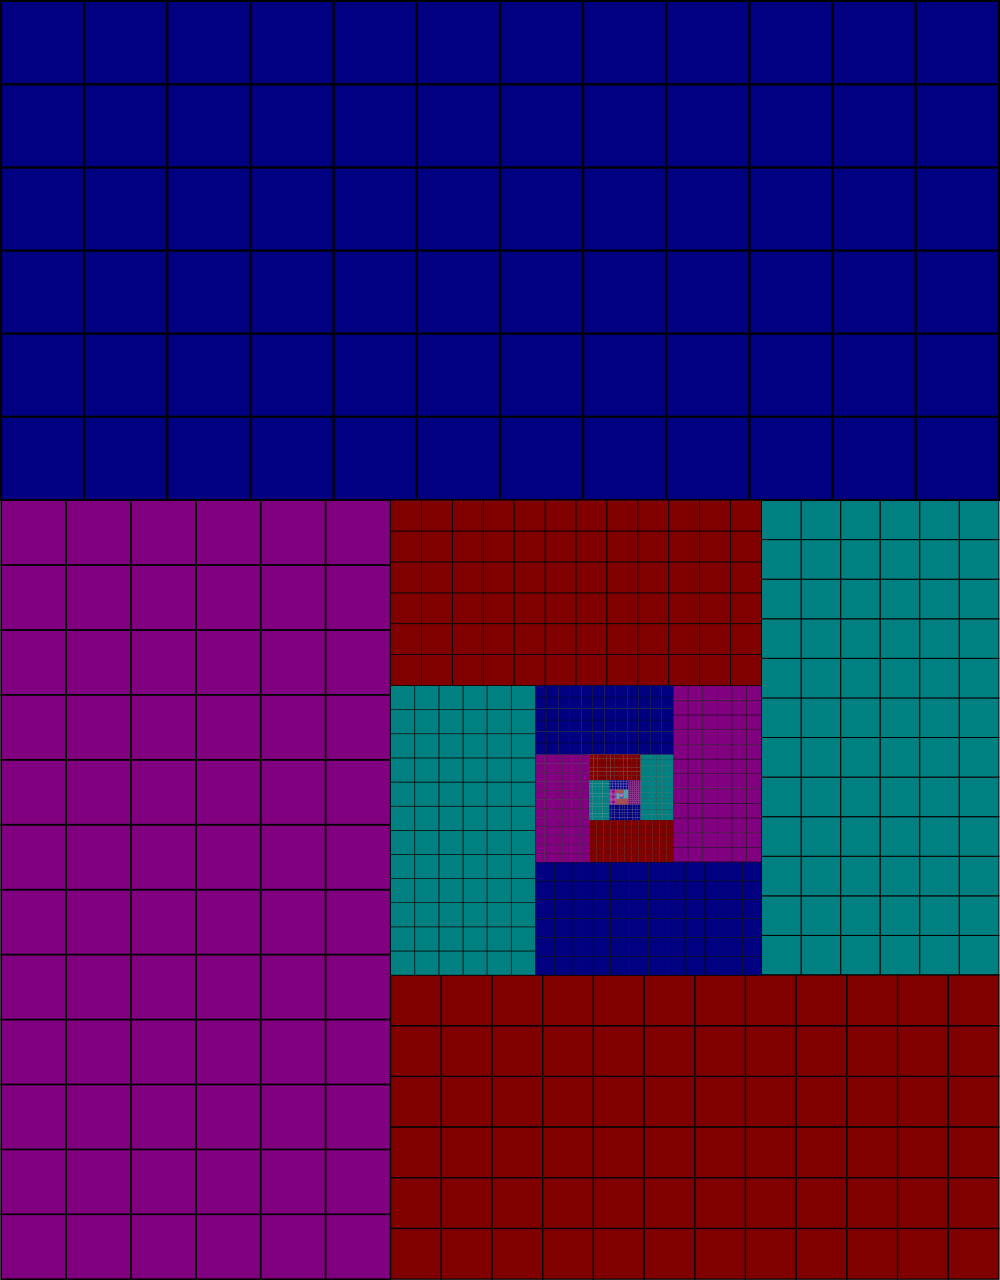 A (c-b)/a method using tiles of 4:2 ratio, with a 4-color theorem sequential order.